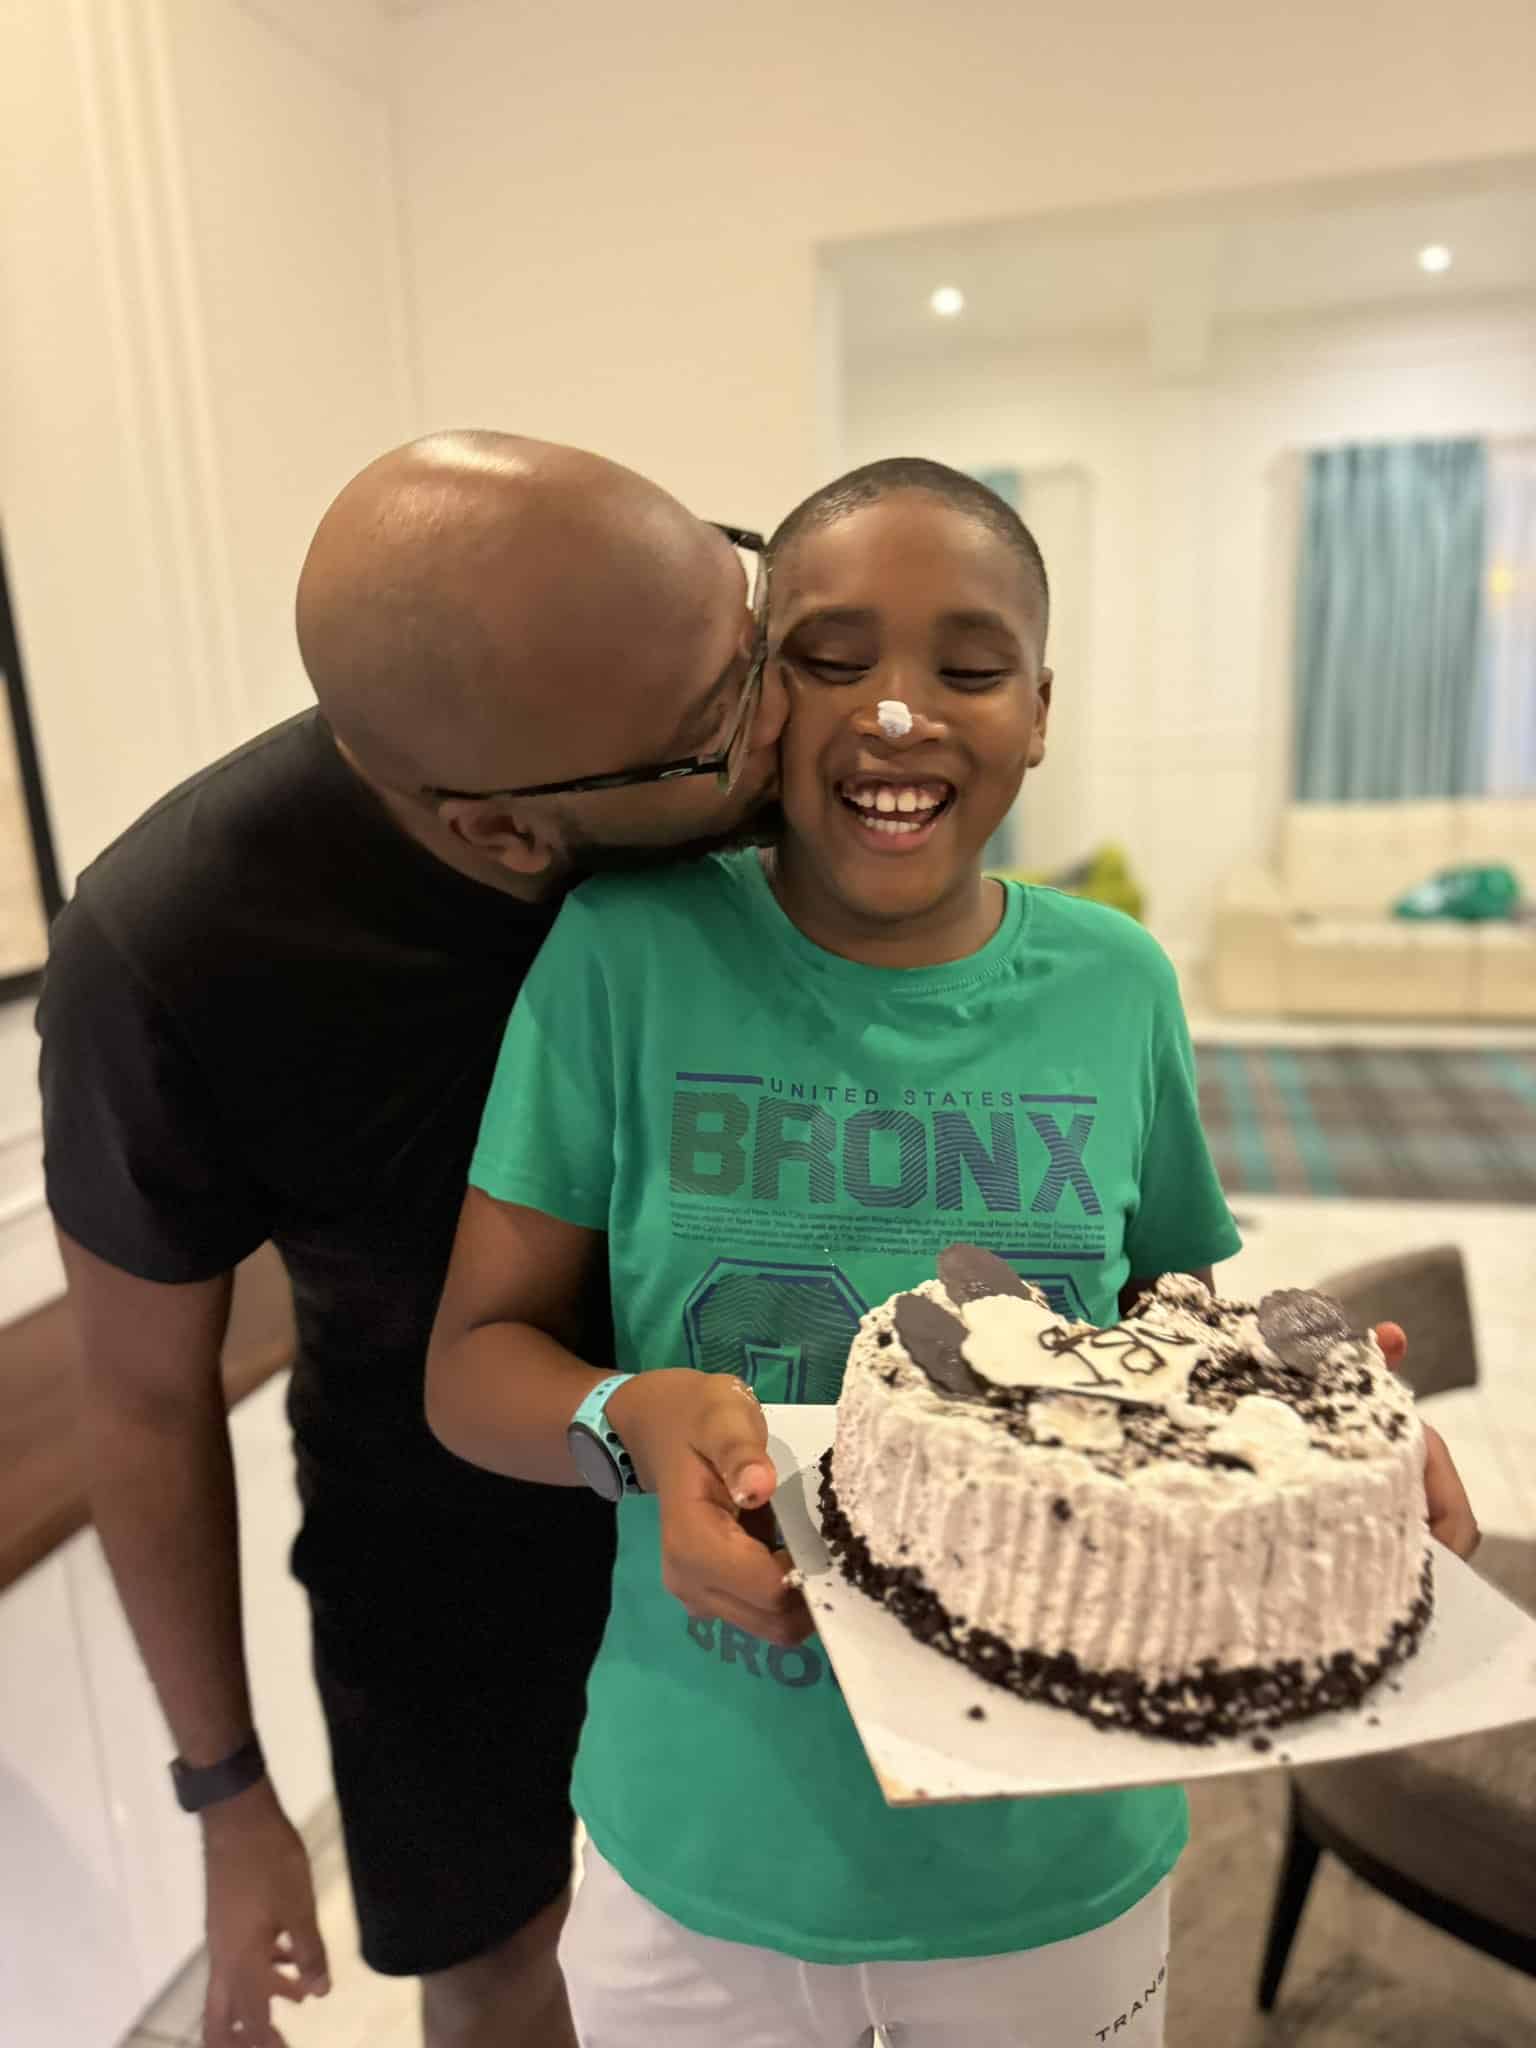 Jason Njoku stirs reactions as he gifts his son Nokia 5310 for his 11th birthday